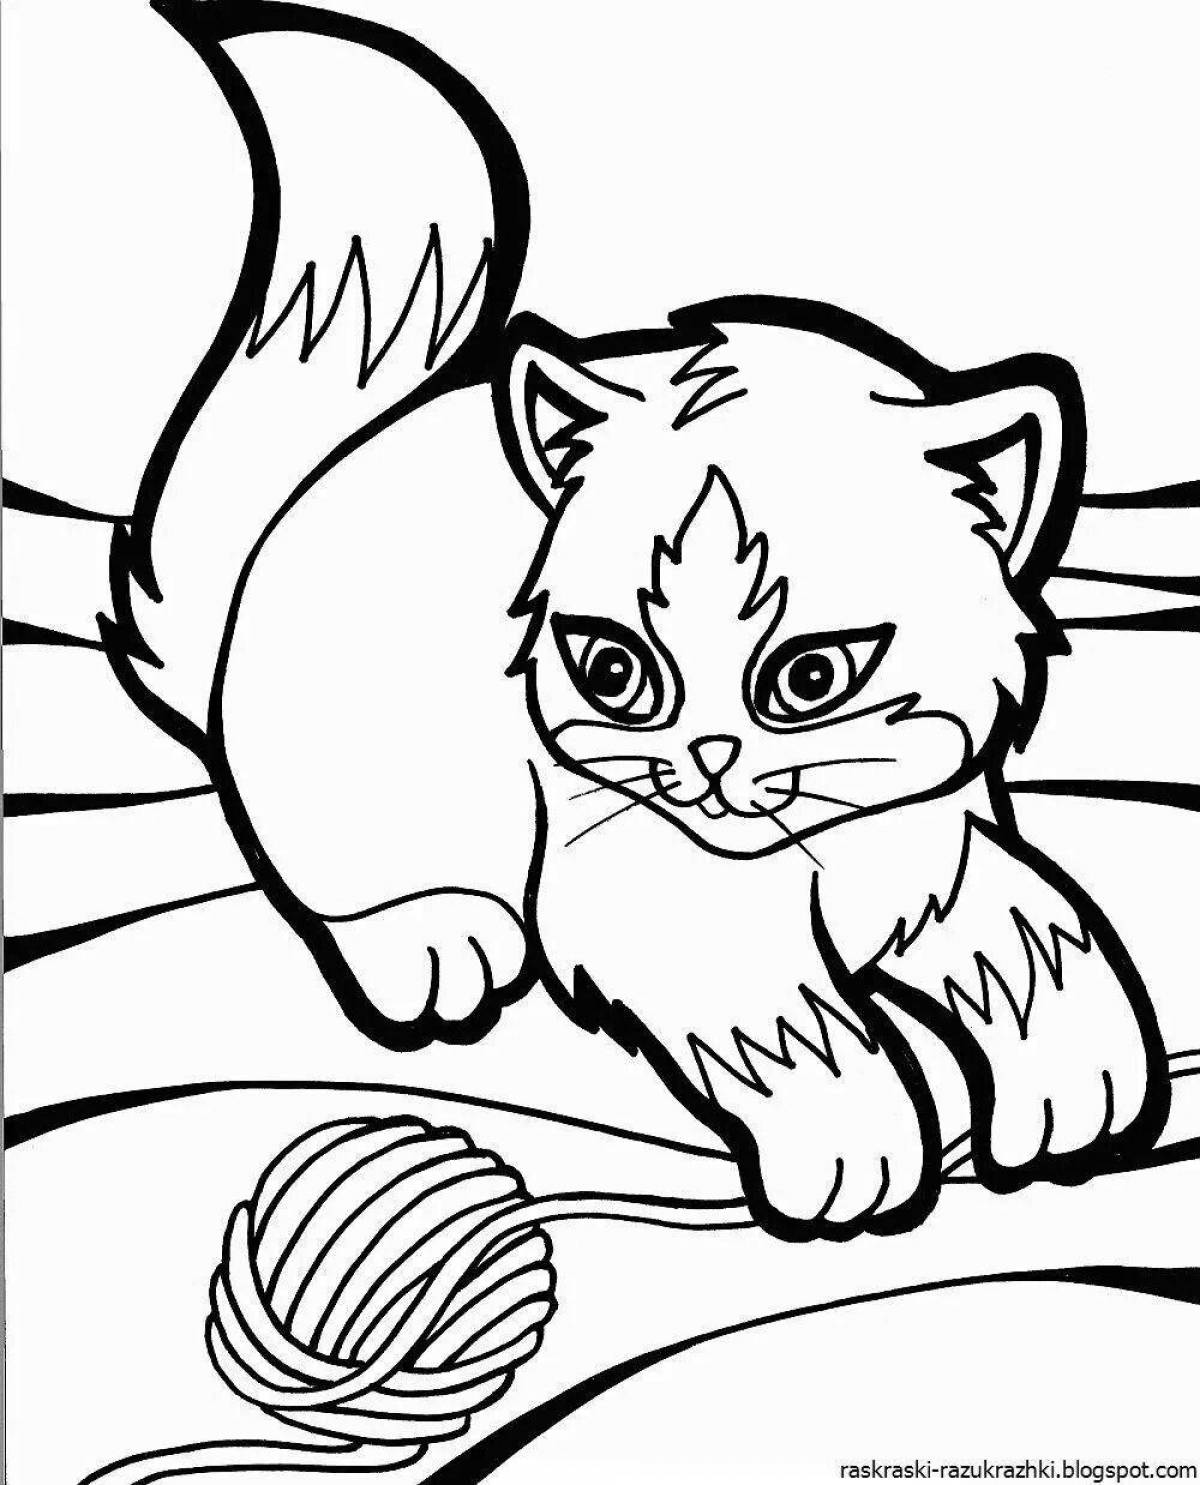 Playful kitty coloring book for kids 6-7 years old